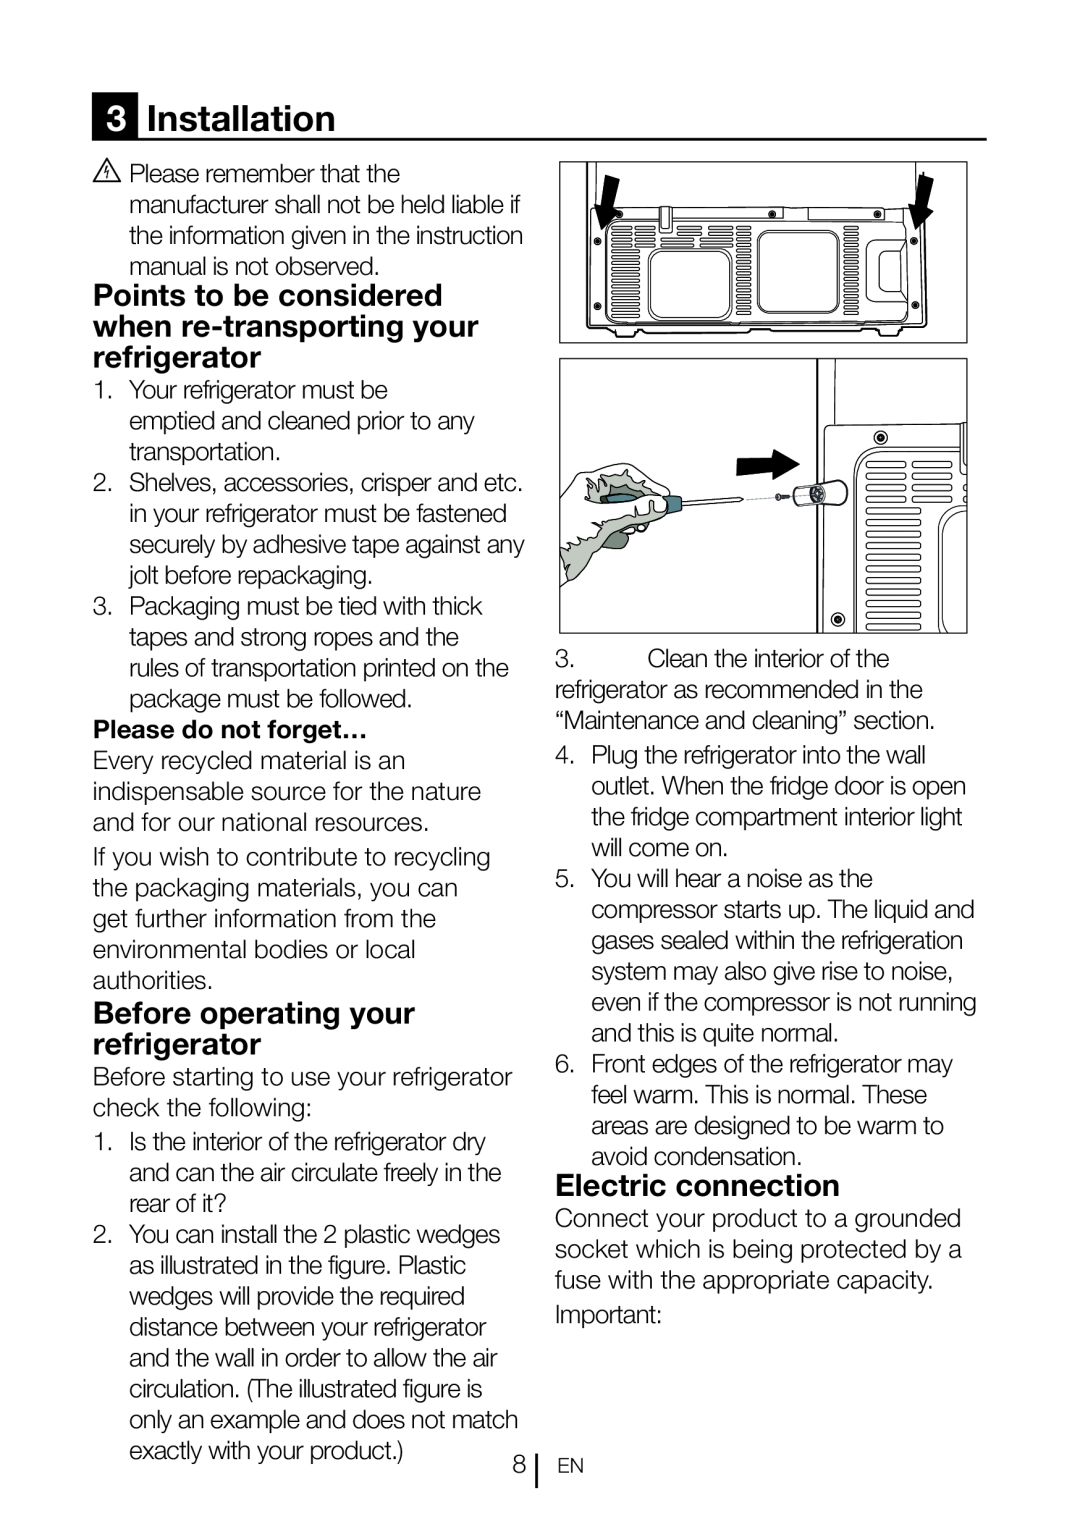 Blomberg DND 1976 XT, DND 1977 XT manual 3Installation, Before operating your refrigerator, Electric connection 